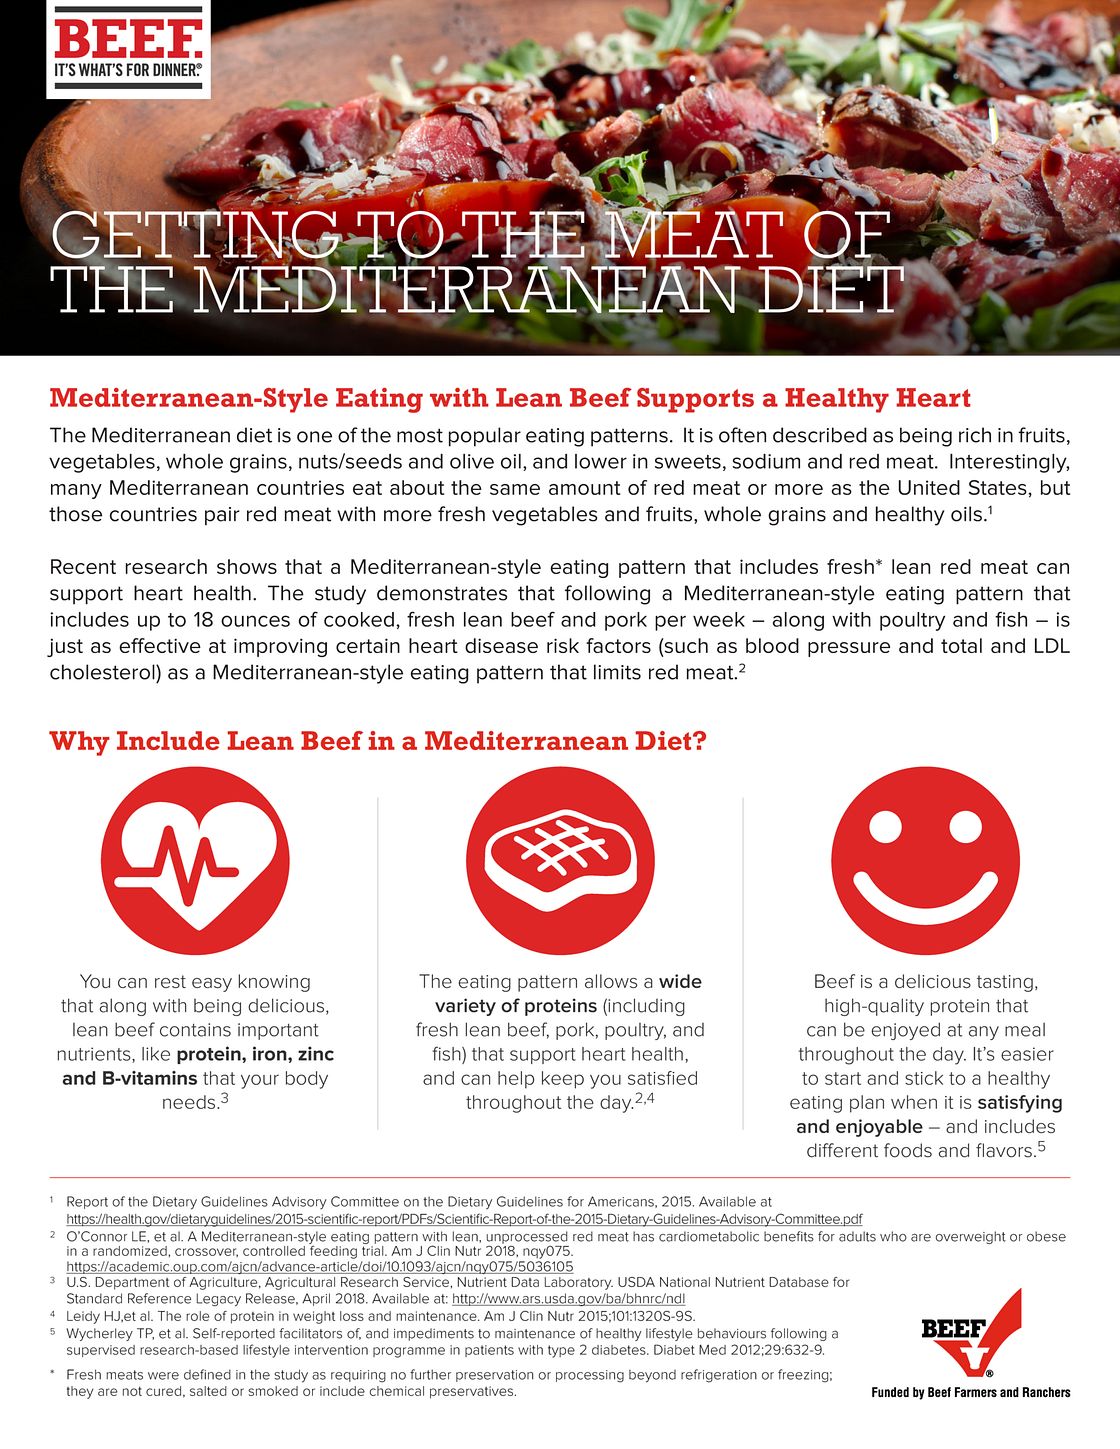 Beef and Heart Health